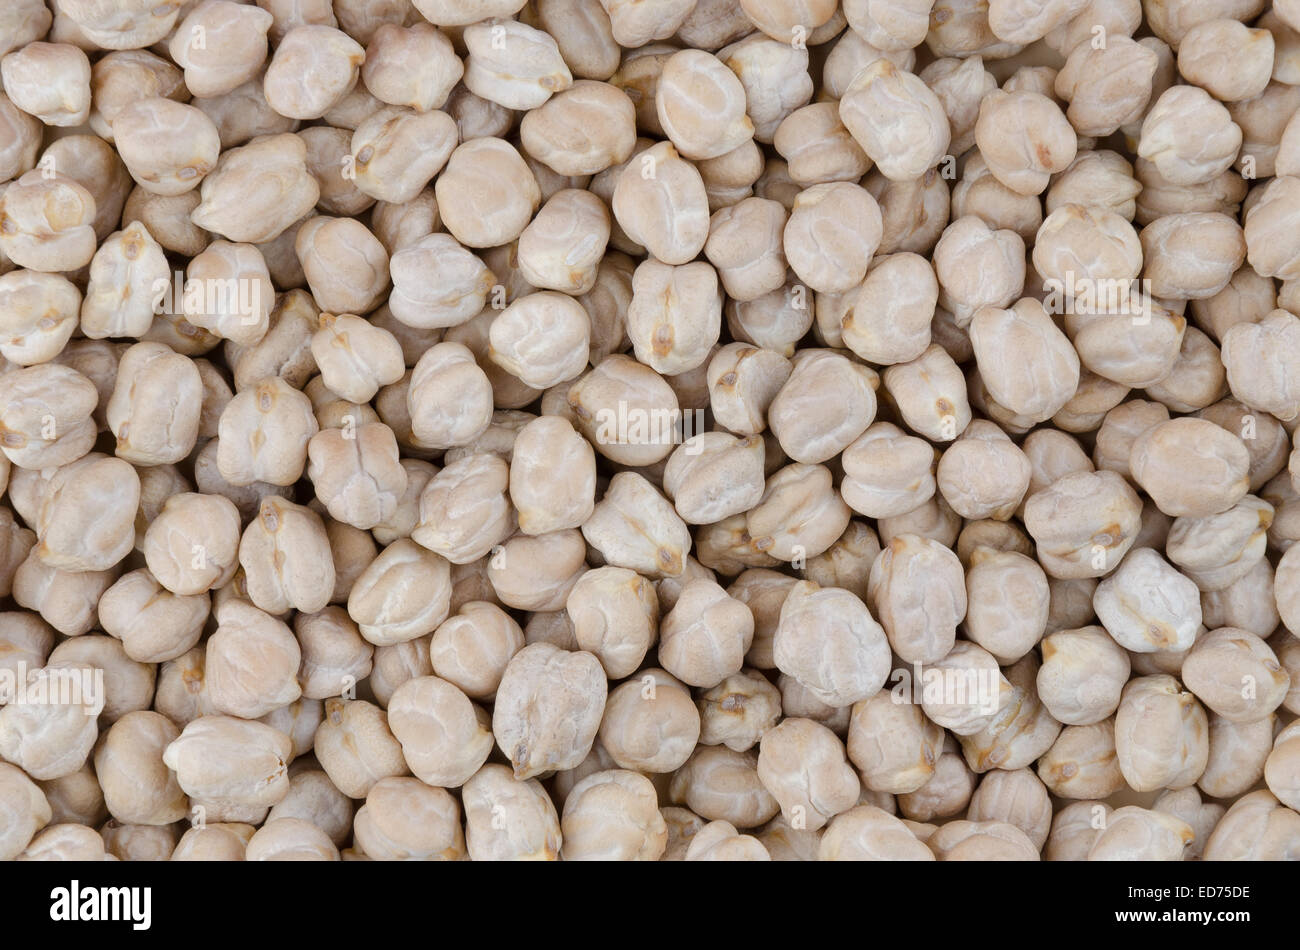 Chickpeas Background. White chickpeas on a straight surface coated, usable as background. Stock Photo